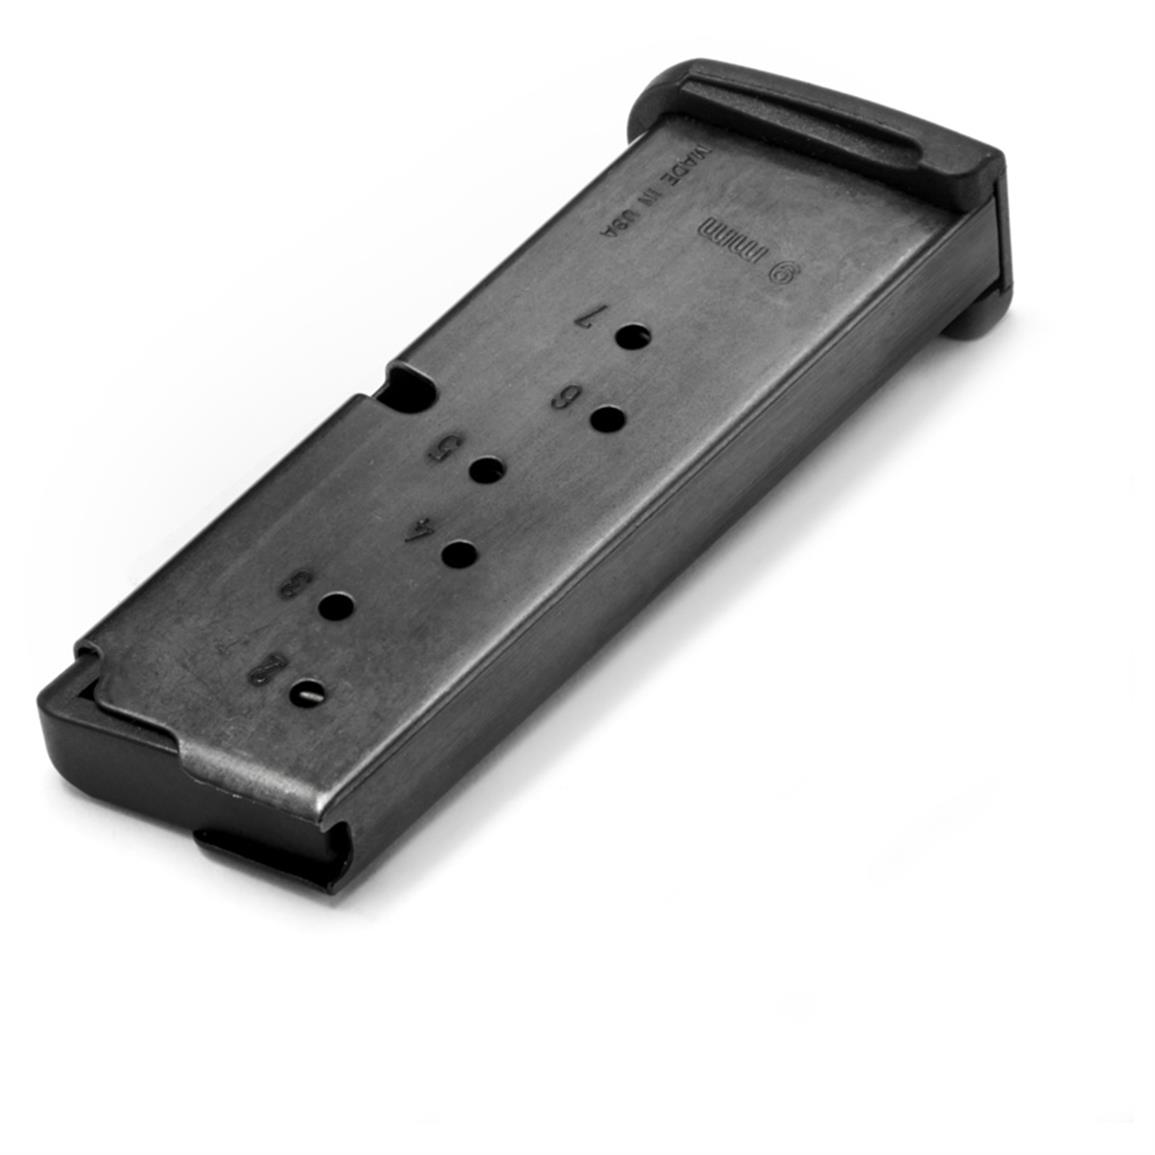 7-rd. Ruger LC9 Factory Handgun Magazine, with Finger Rest - $35.99 (All Club Orders $49+ Ship FREE!)